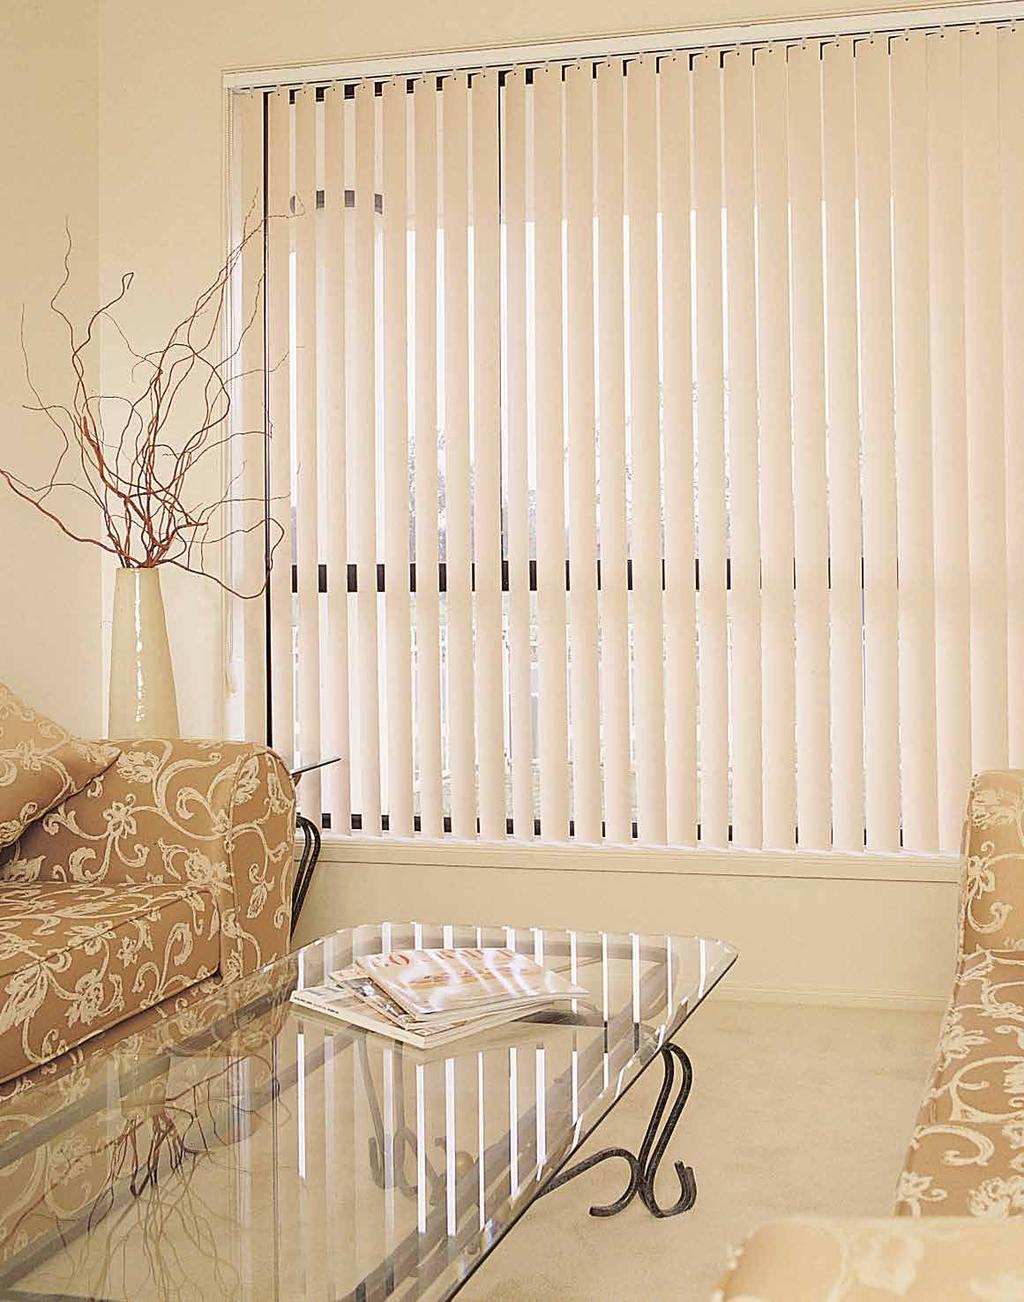 SHICANE VINYL All the advantages of a Vertical Blind with even more features. Available in an 89mm wide flat profile slat.